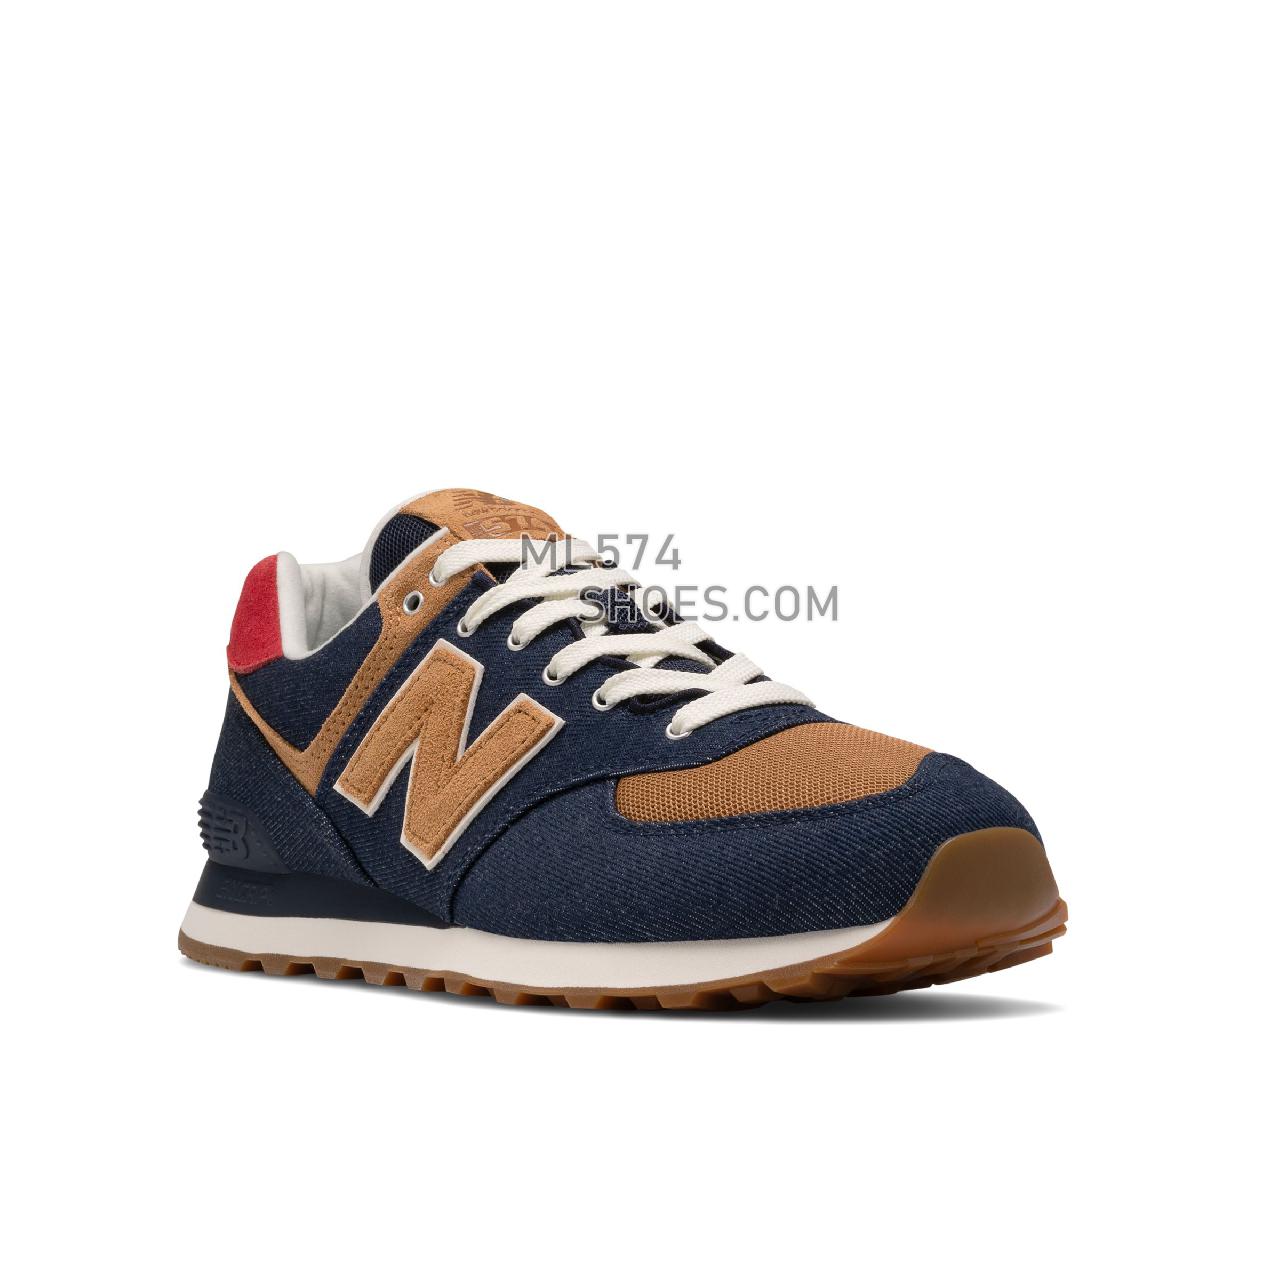 New Balance 574v2 Denim - Men's Classic Sneakers - Pigment with Team Red - ML574DN2